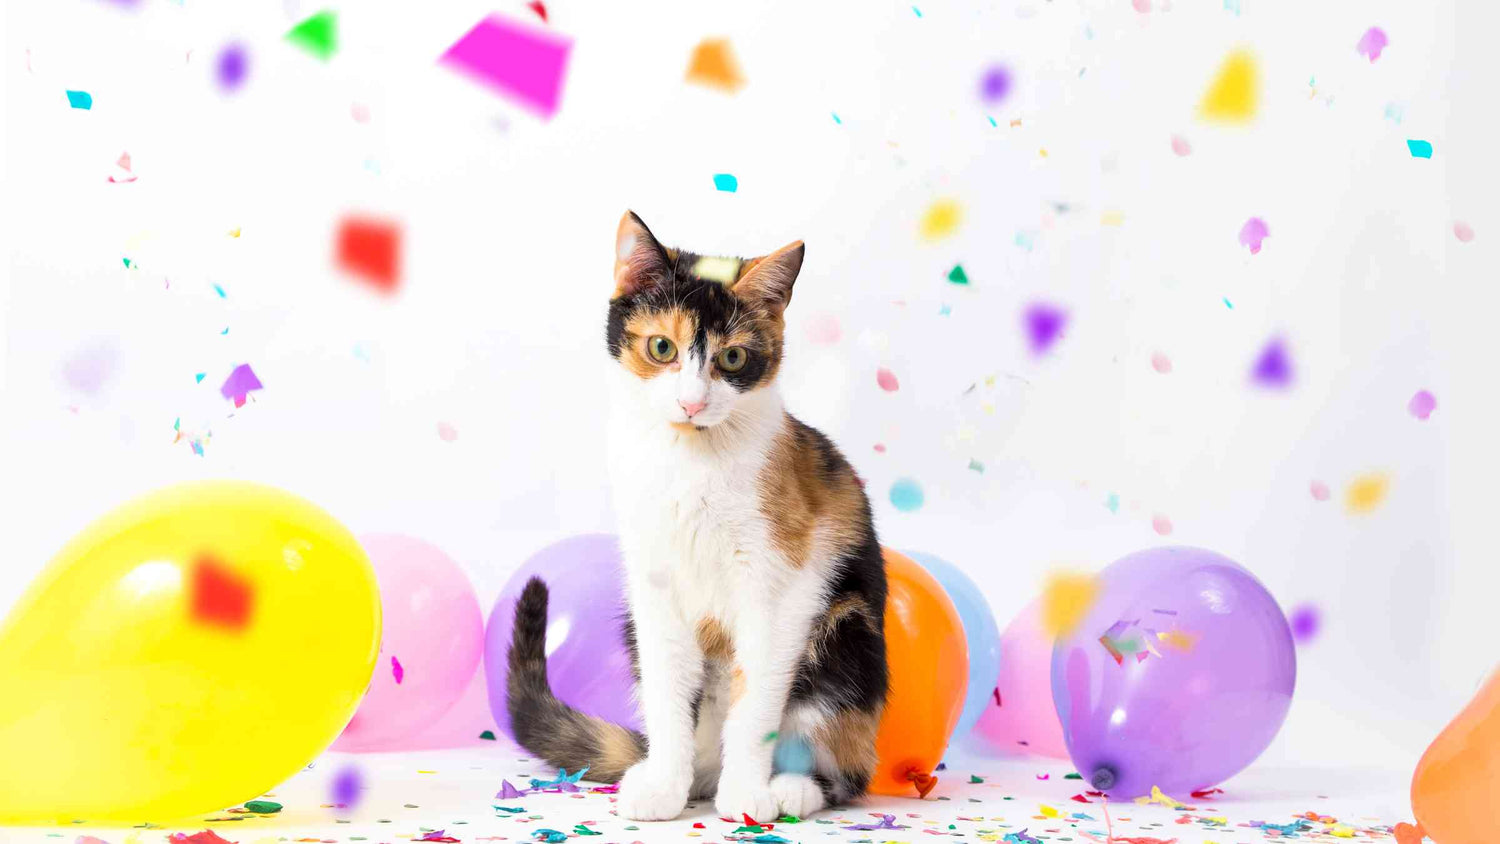 How to Celebrate National Cat Day - Cat with balloons and streamers